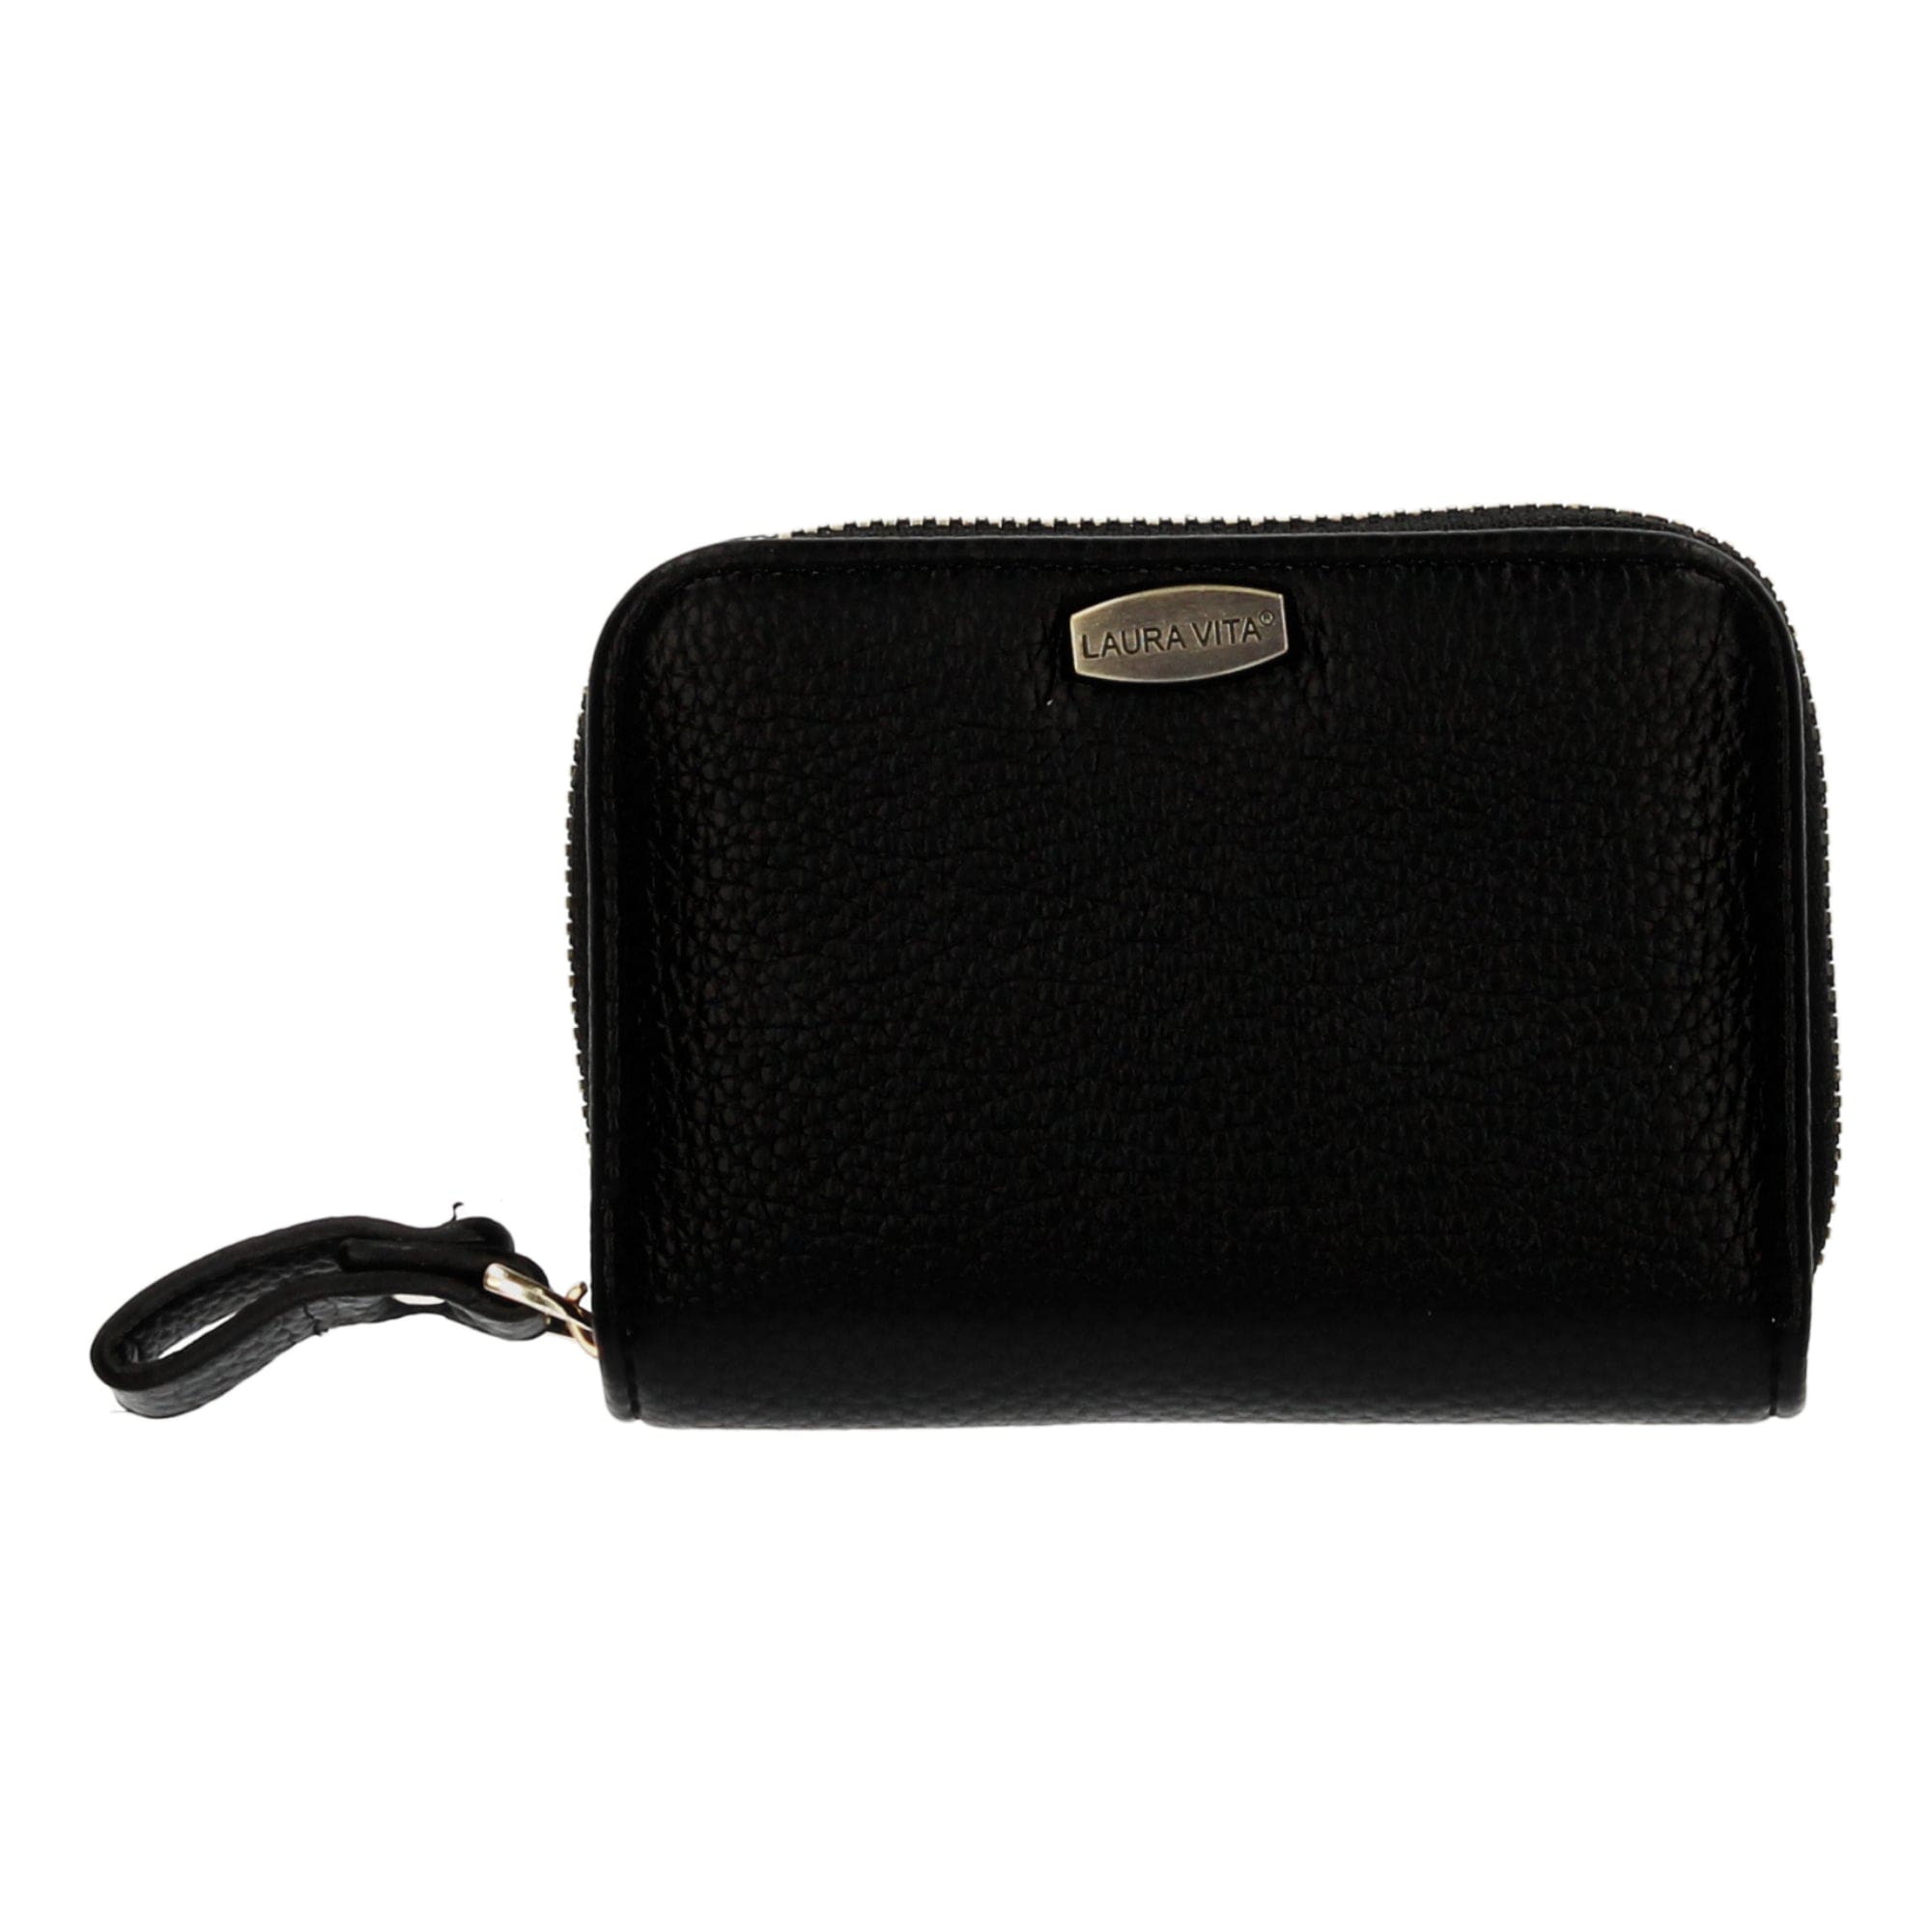 Bercy card case - Black - Small leather goods